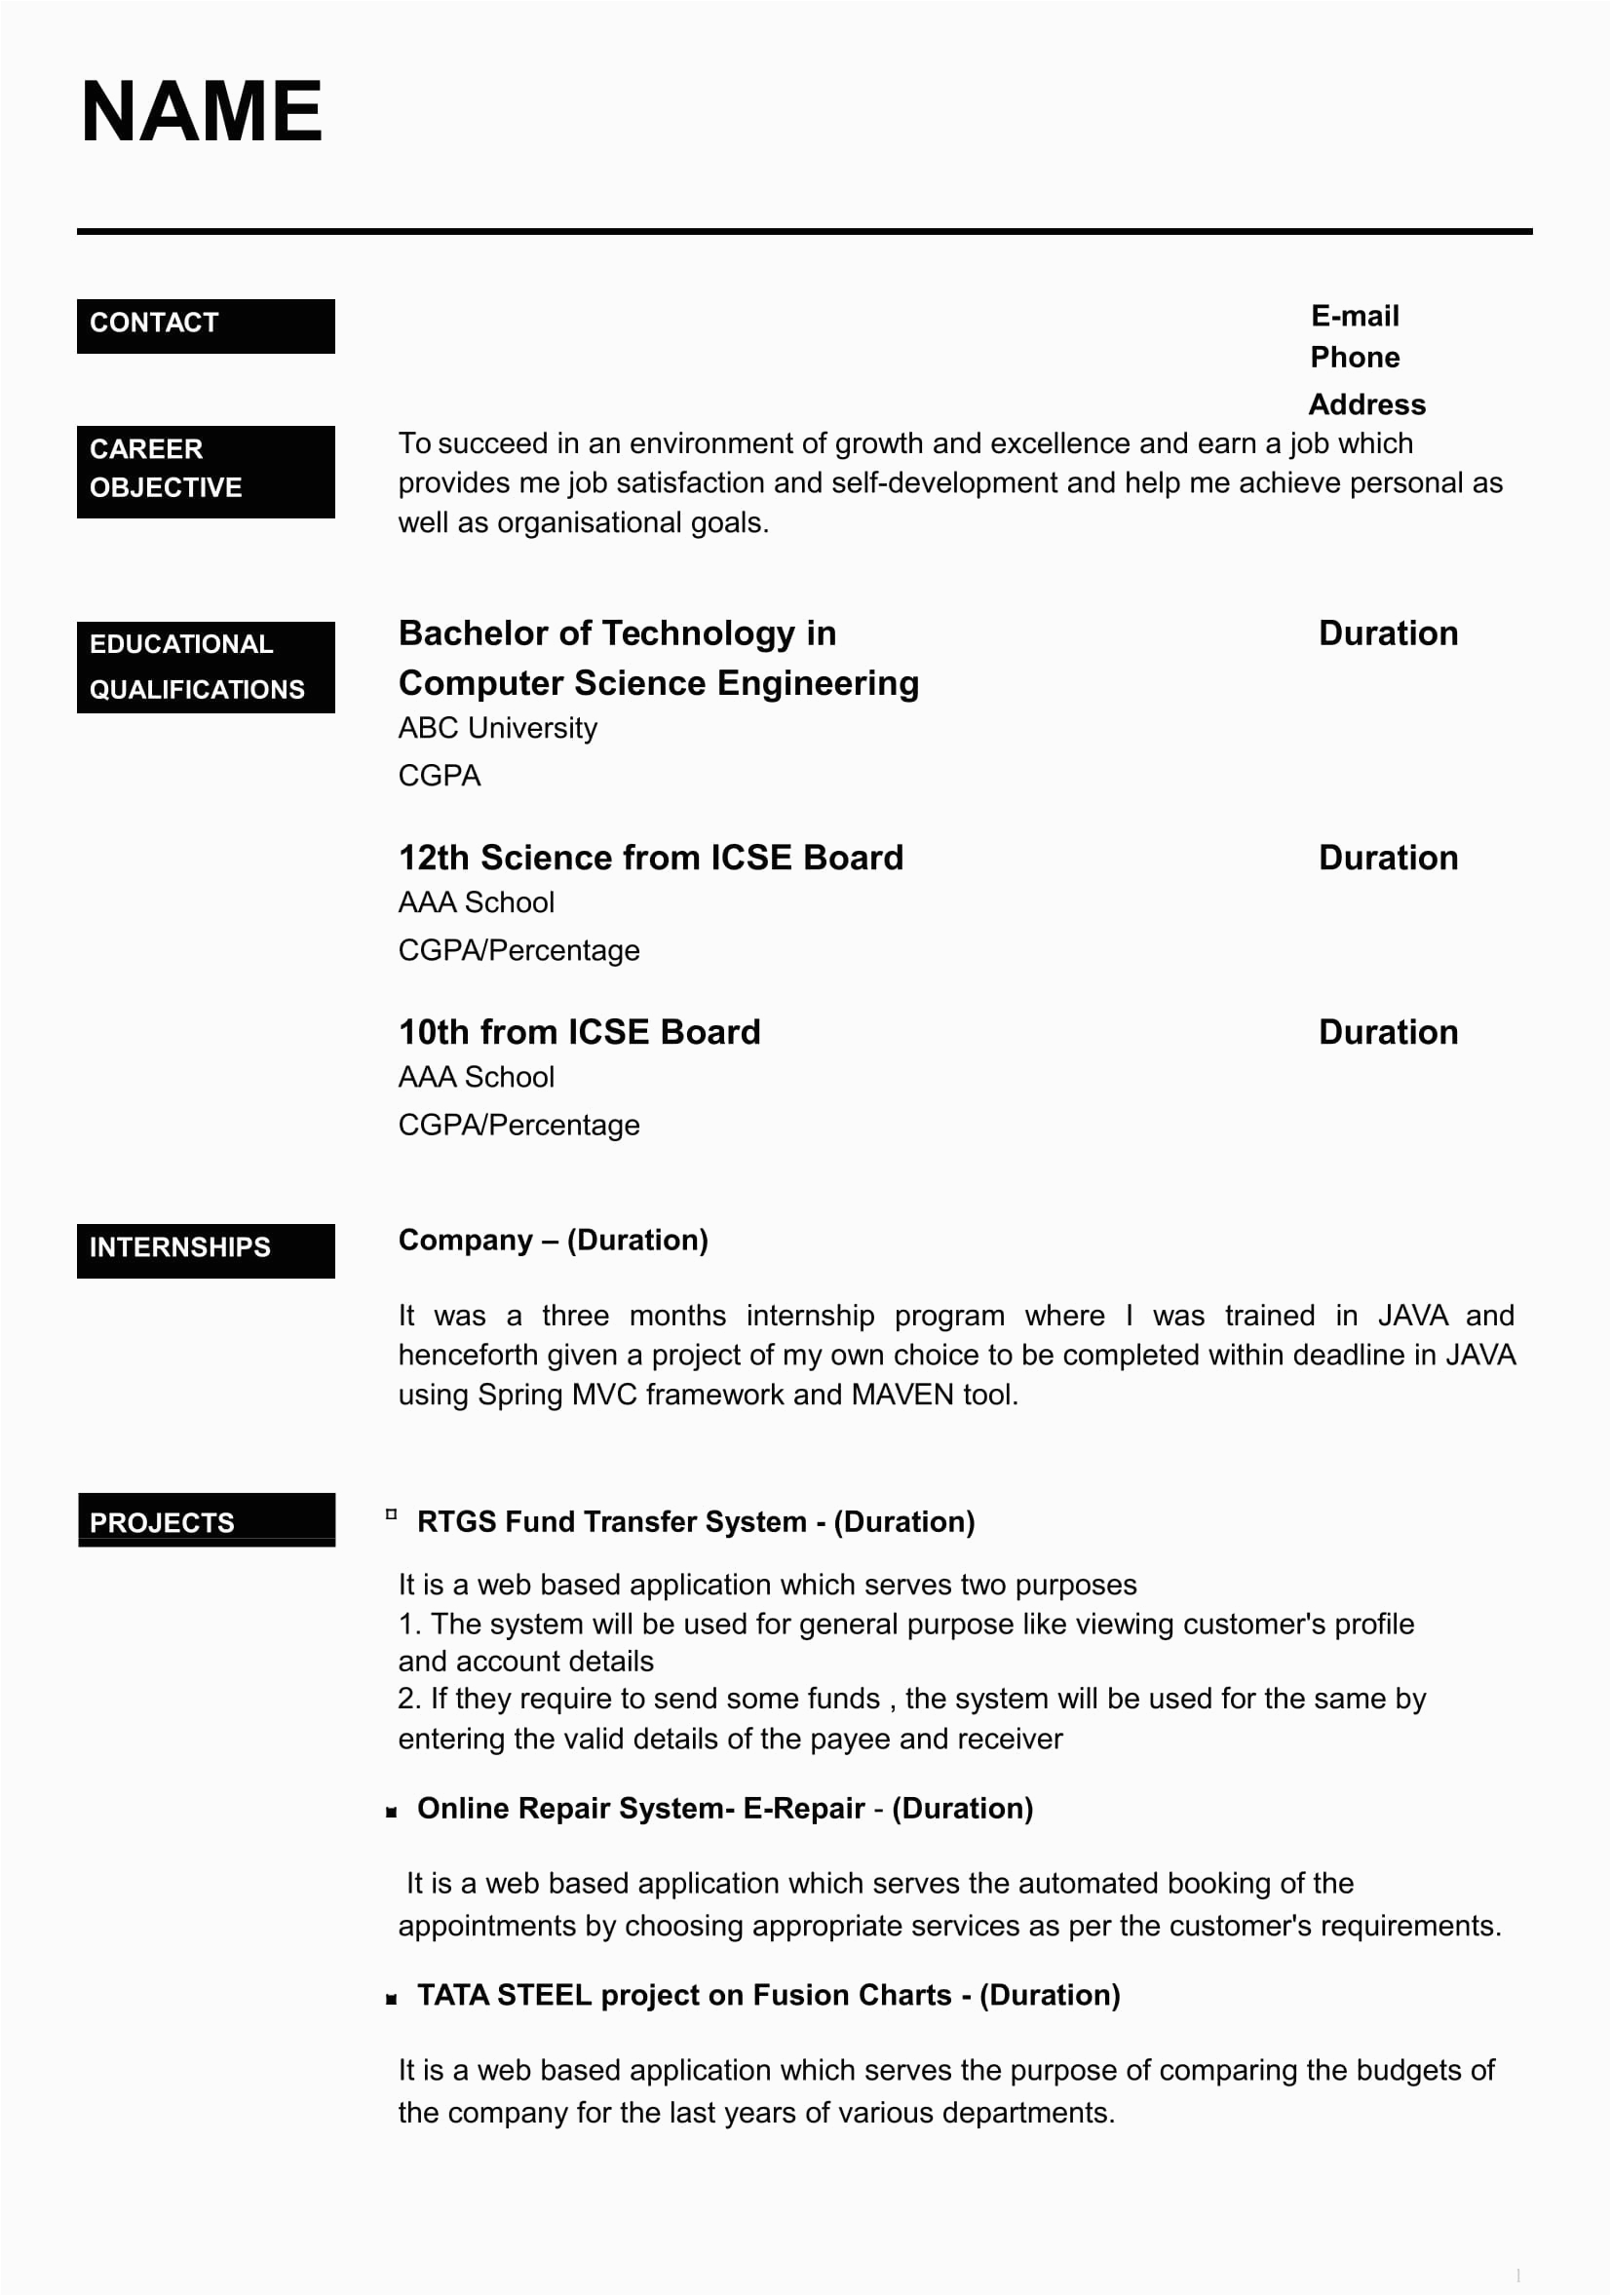 Sample Resume for Freshers Engineers Computer Science Pdf Resume Puter Science Engineer